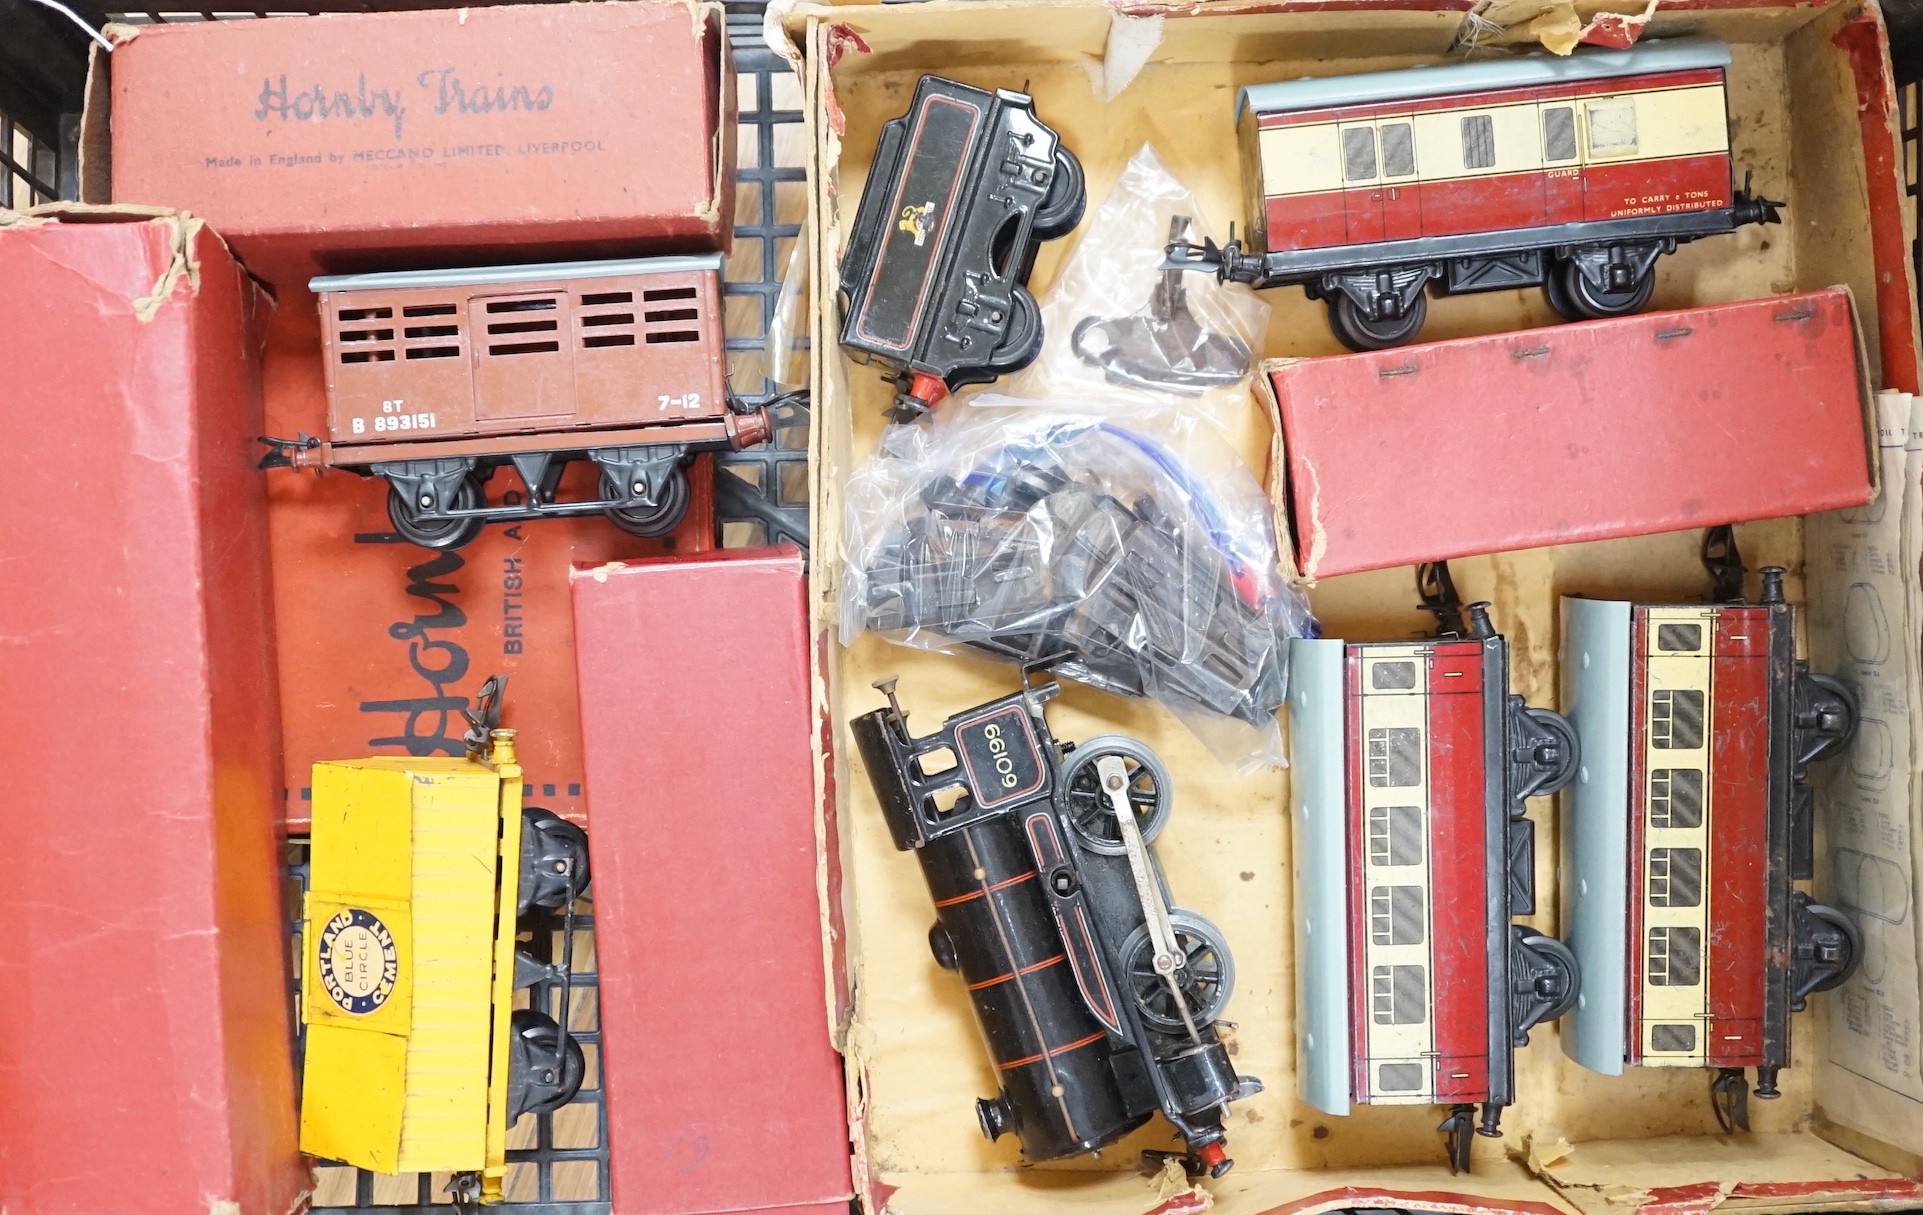 Hornby gauge 0 locomotives, rolling stock and accessories, and a boxed Hornby M-Series trainset, post-war